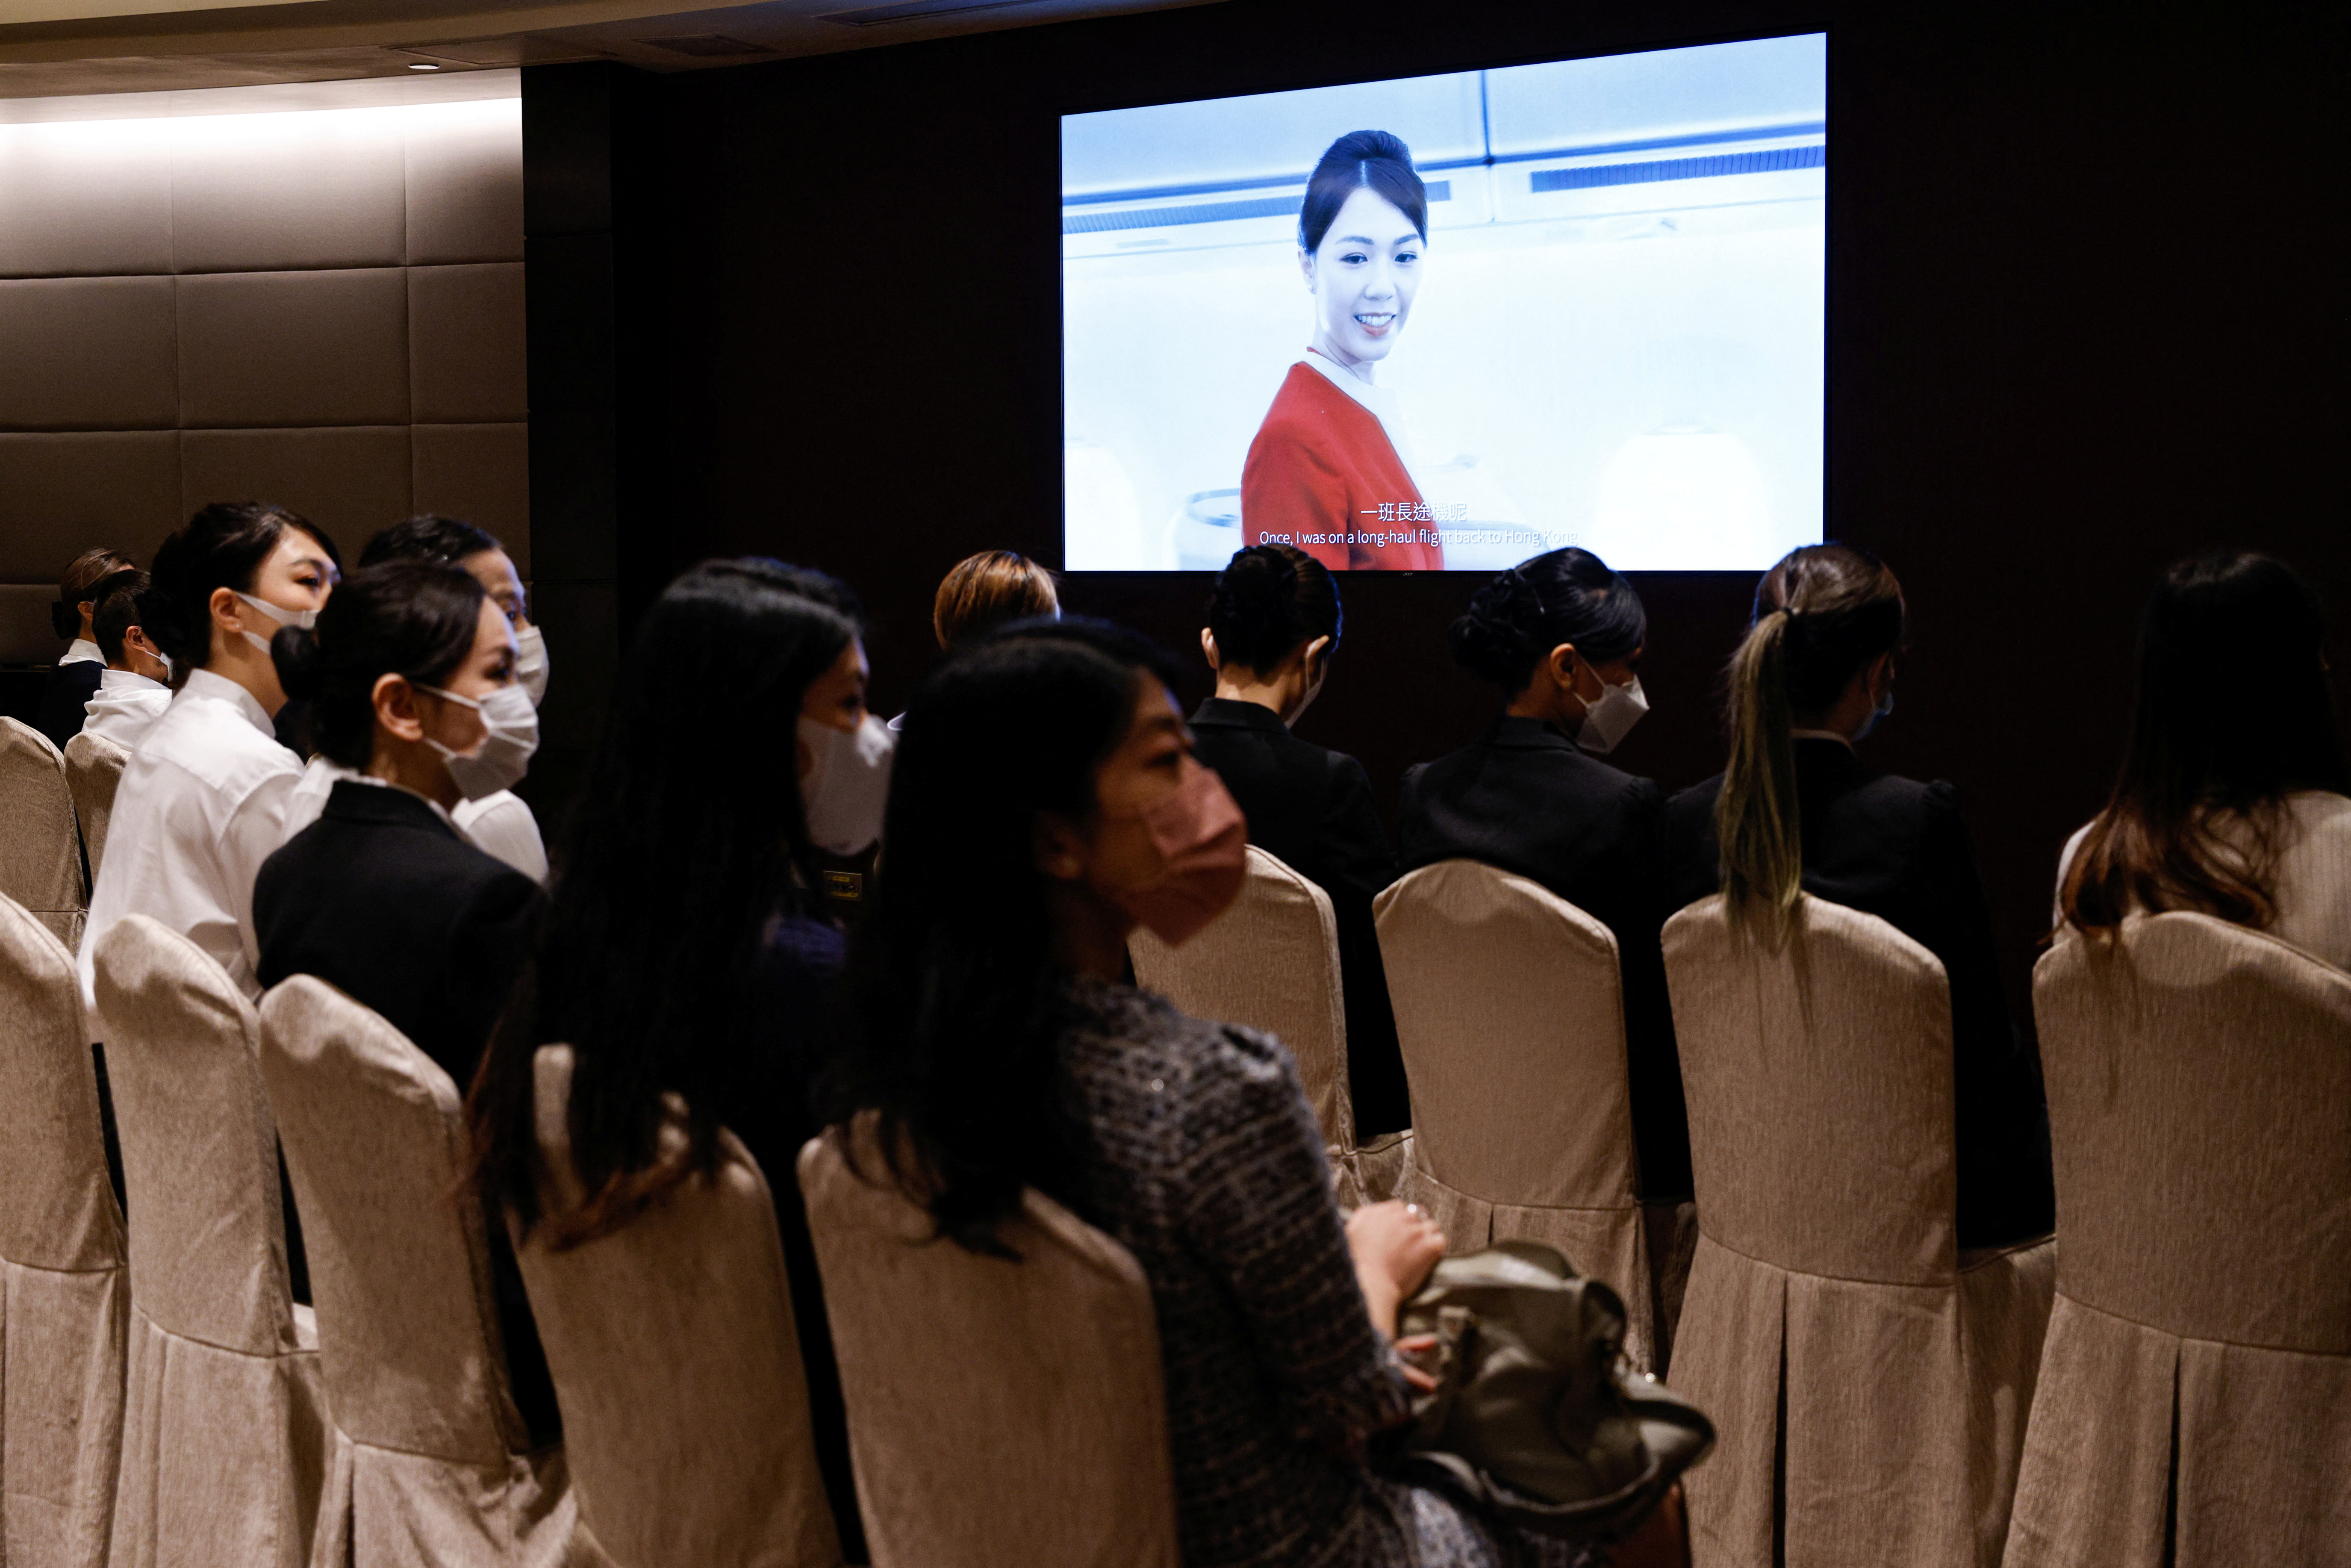 Applicants sit in a waiting room during the Cathay Pacific's flight attendants recruitment day, first time since the COVID-19 pandemic